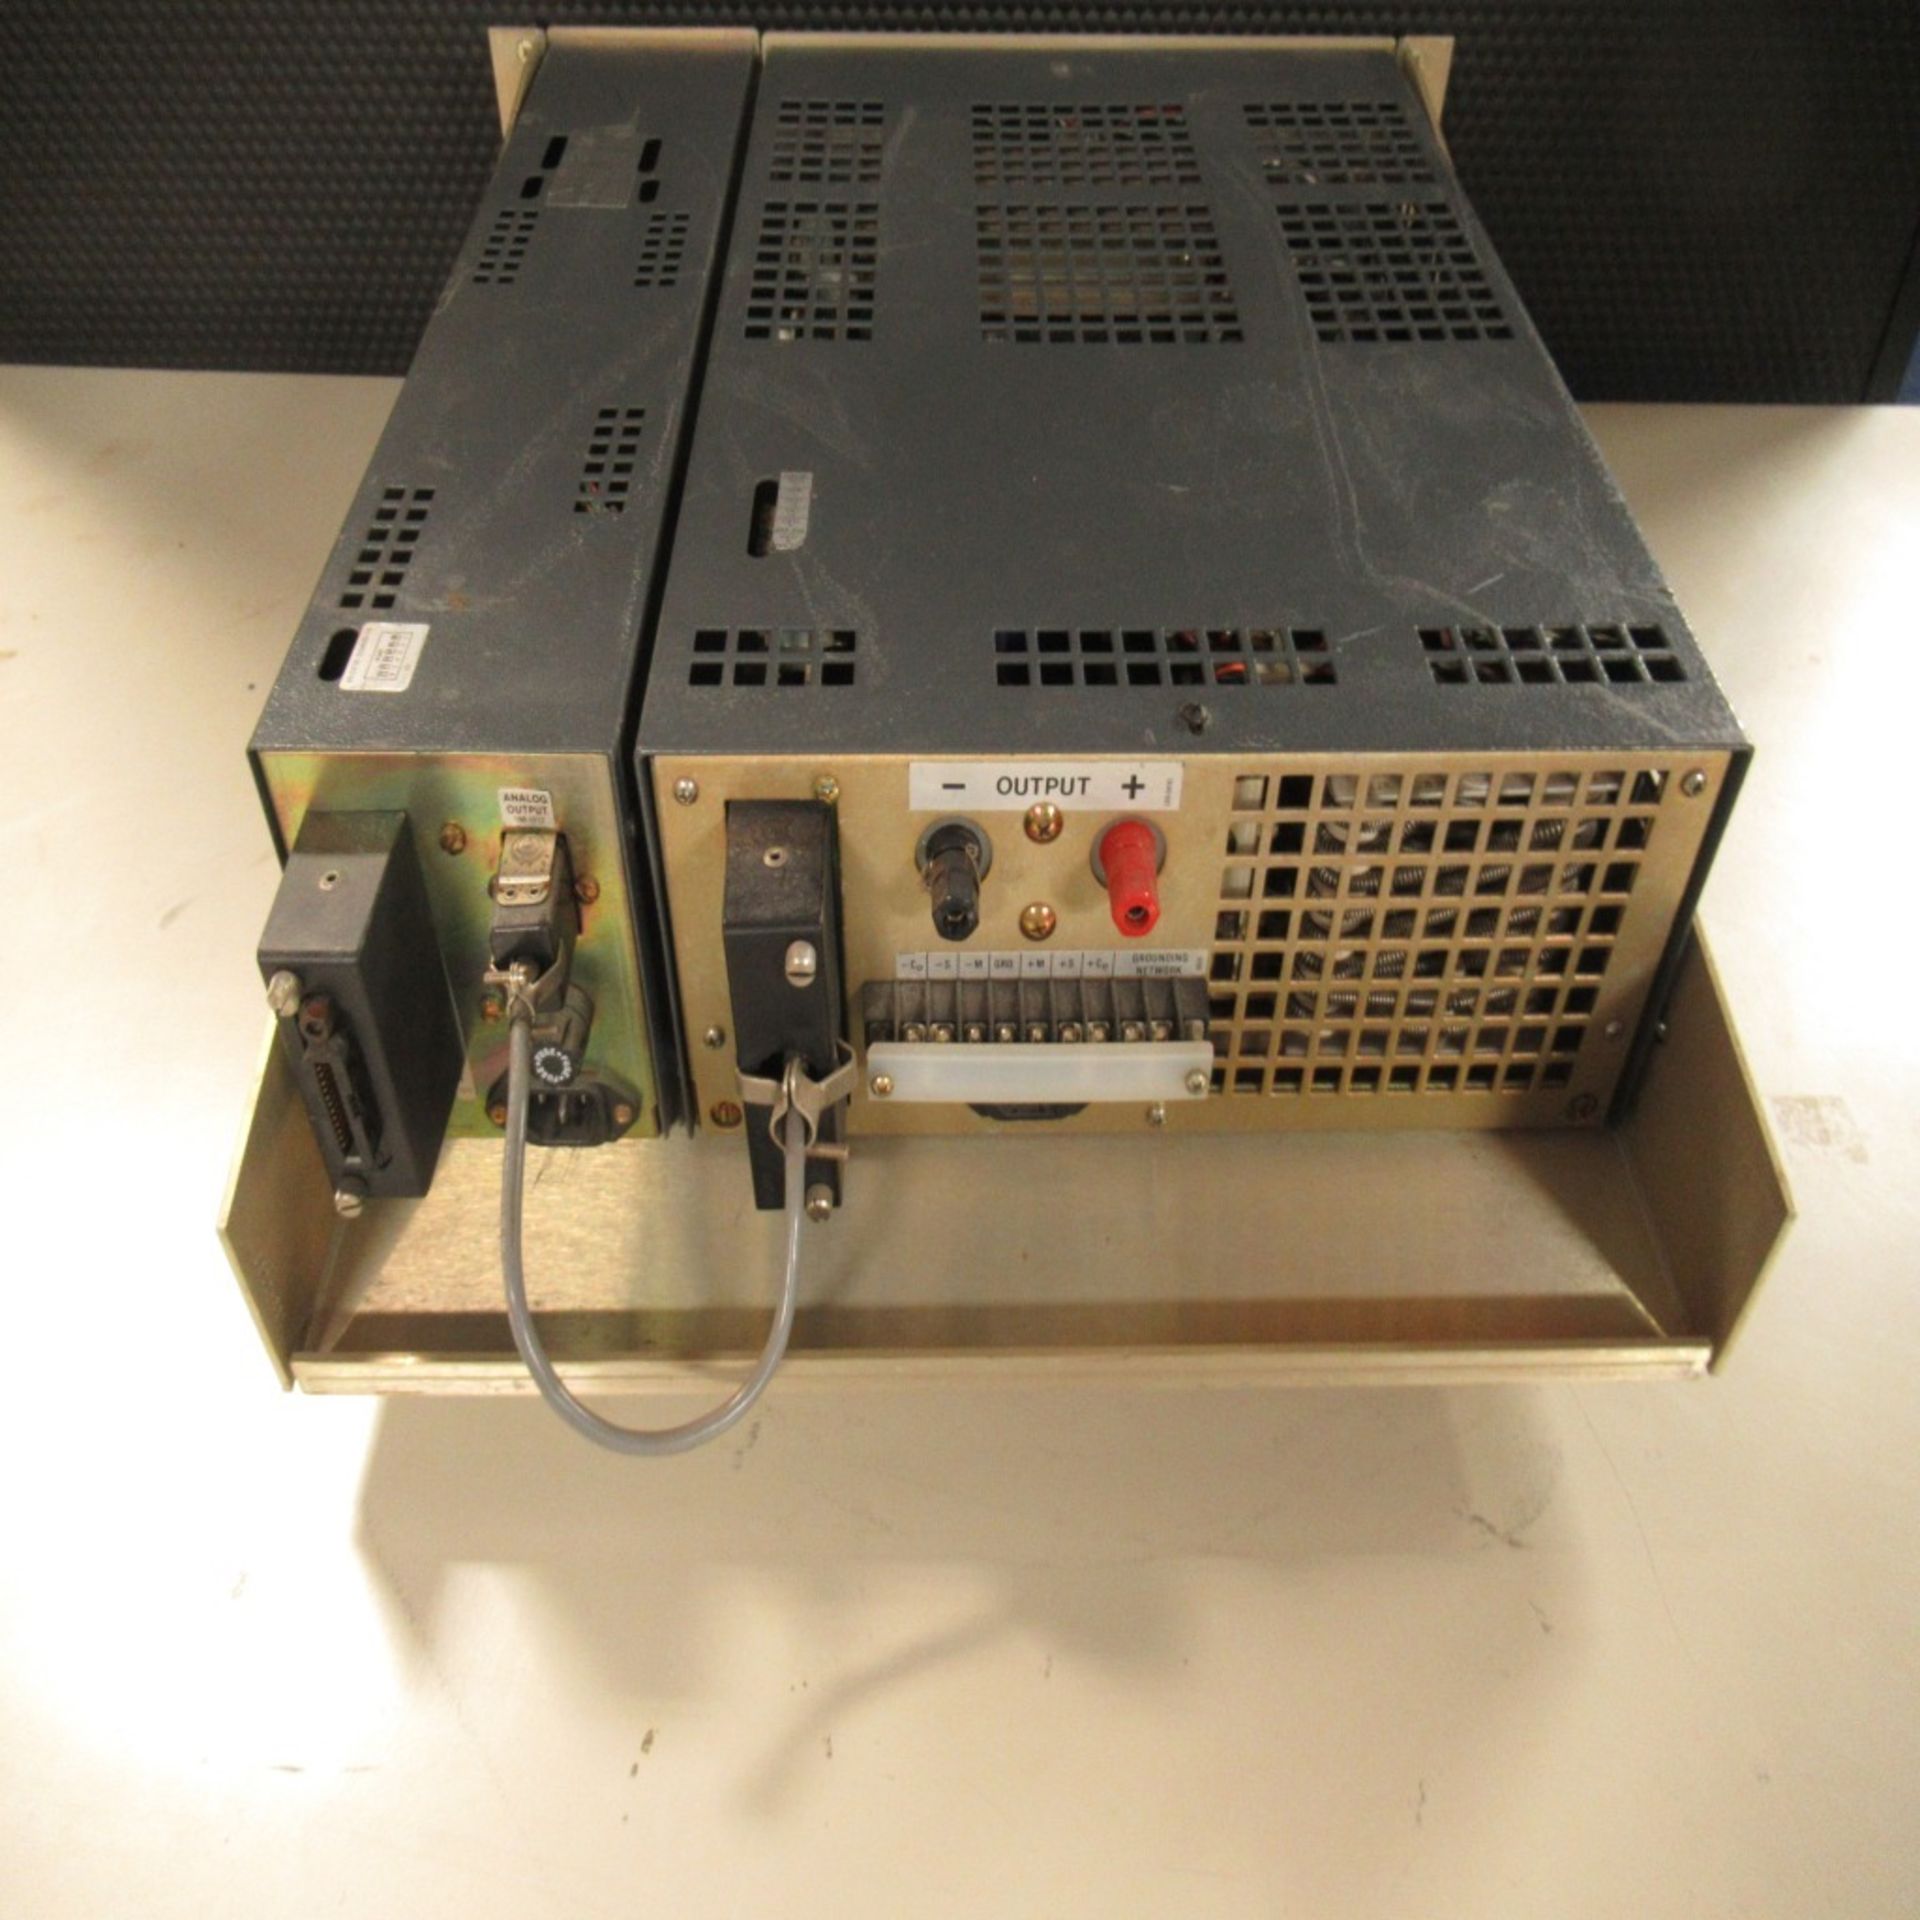 PHOTON SNAP SHOT MODEL 6000 *POWERS ON* NO SCREEN DISPLAY; FARNELL AP20-80 REGULATED POWER SUPPLY * - Image 33 of 222